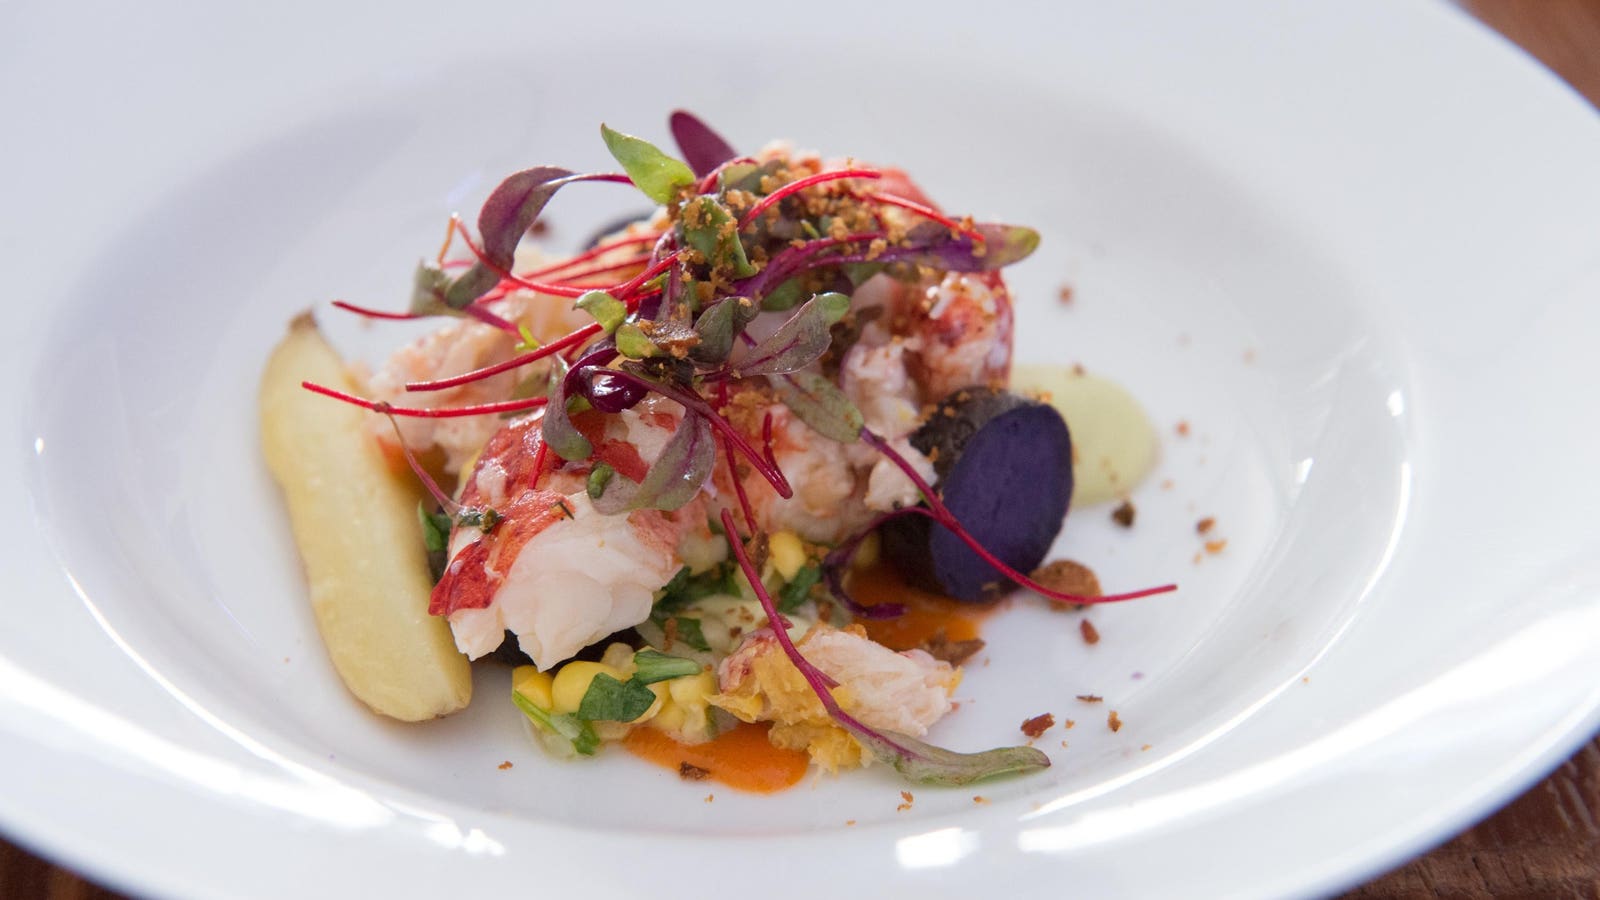 Celebrate The Massachusetts Dining Scene At This Year’s Nantucket Wine & Food Festival